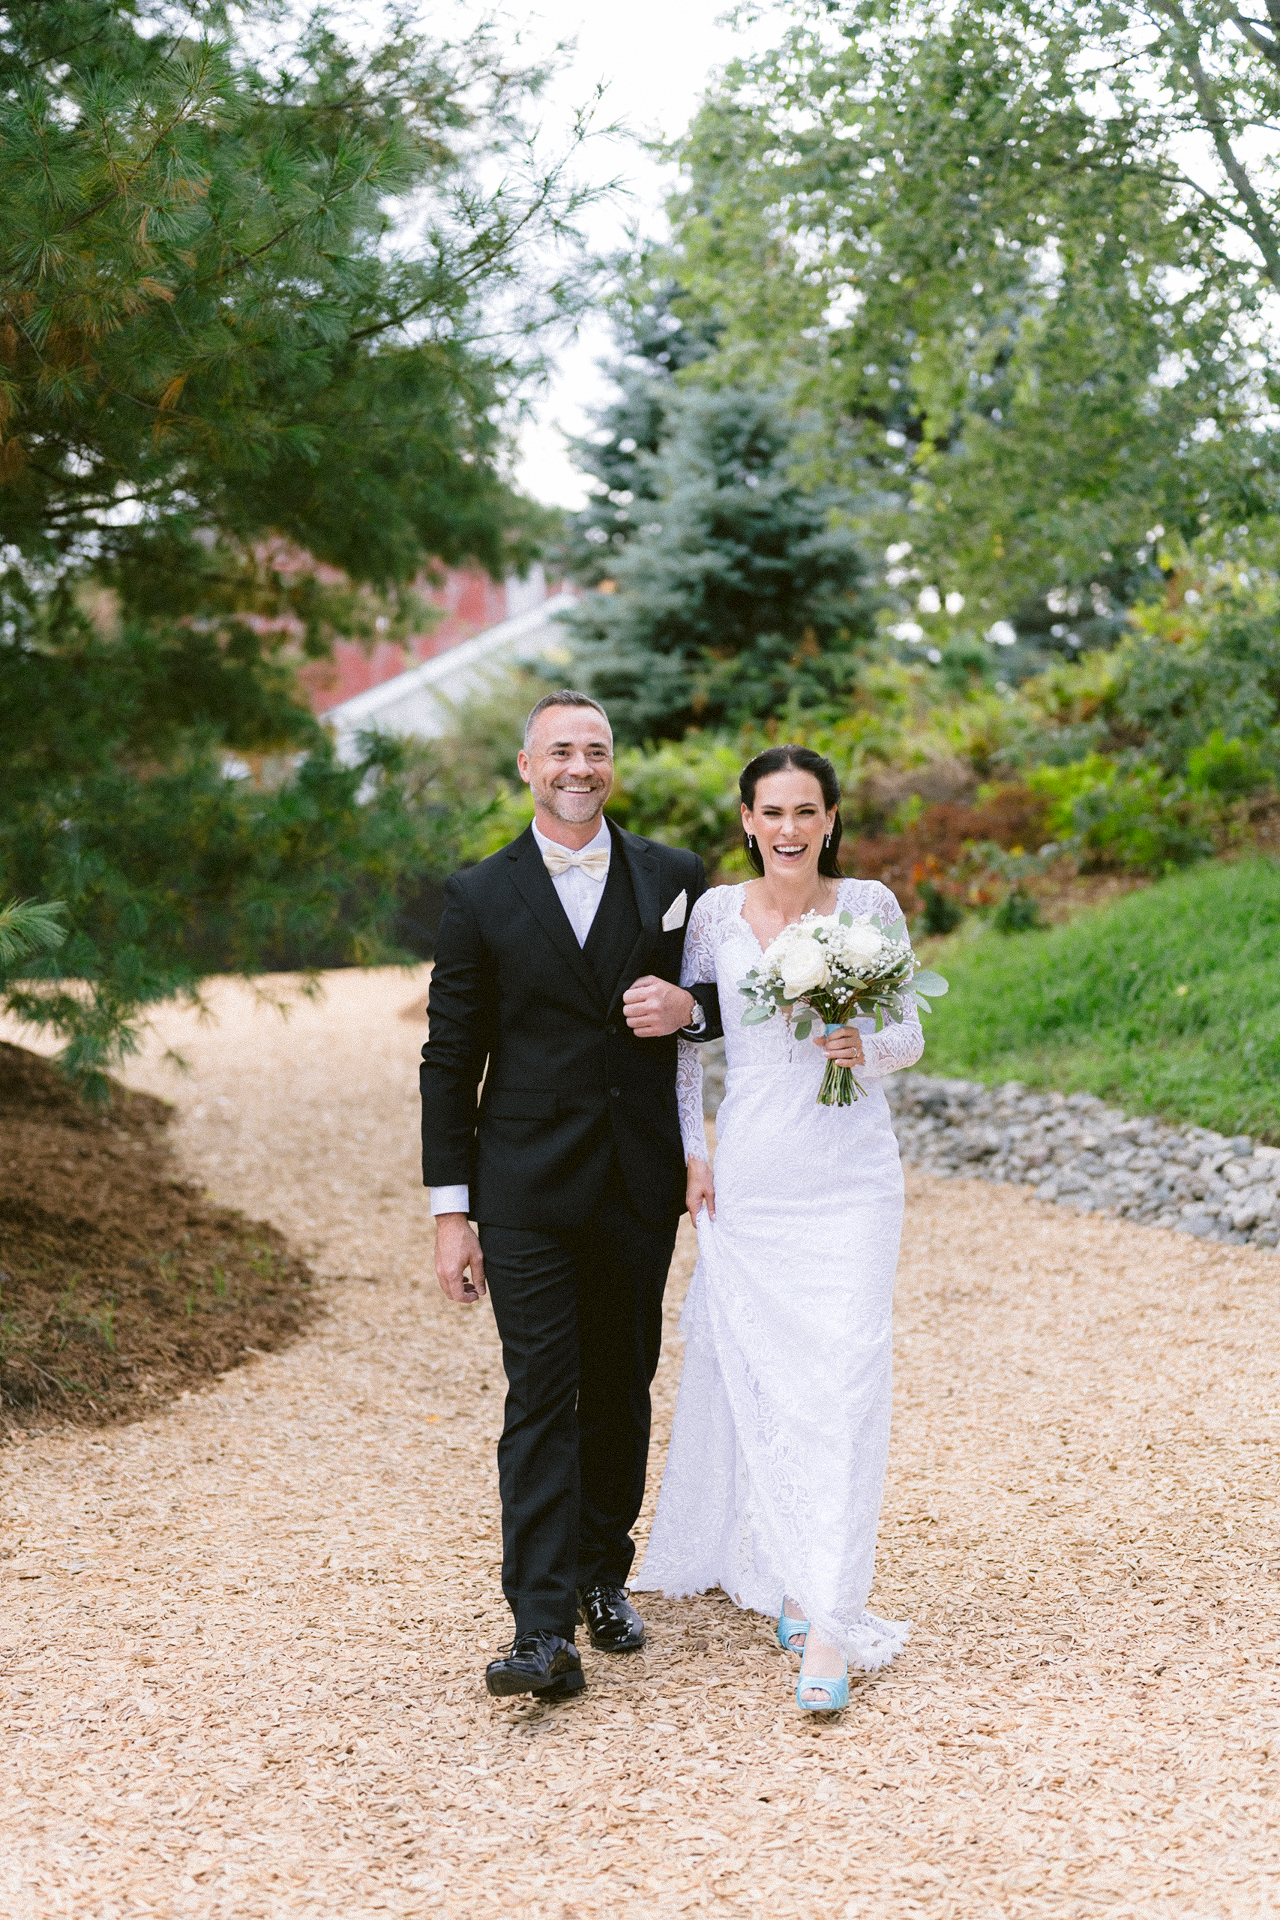 A smiling bride in wedding attire holding her brother walking down the aisle on a gravel path at Cambium Farms.